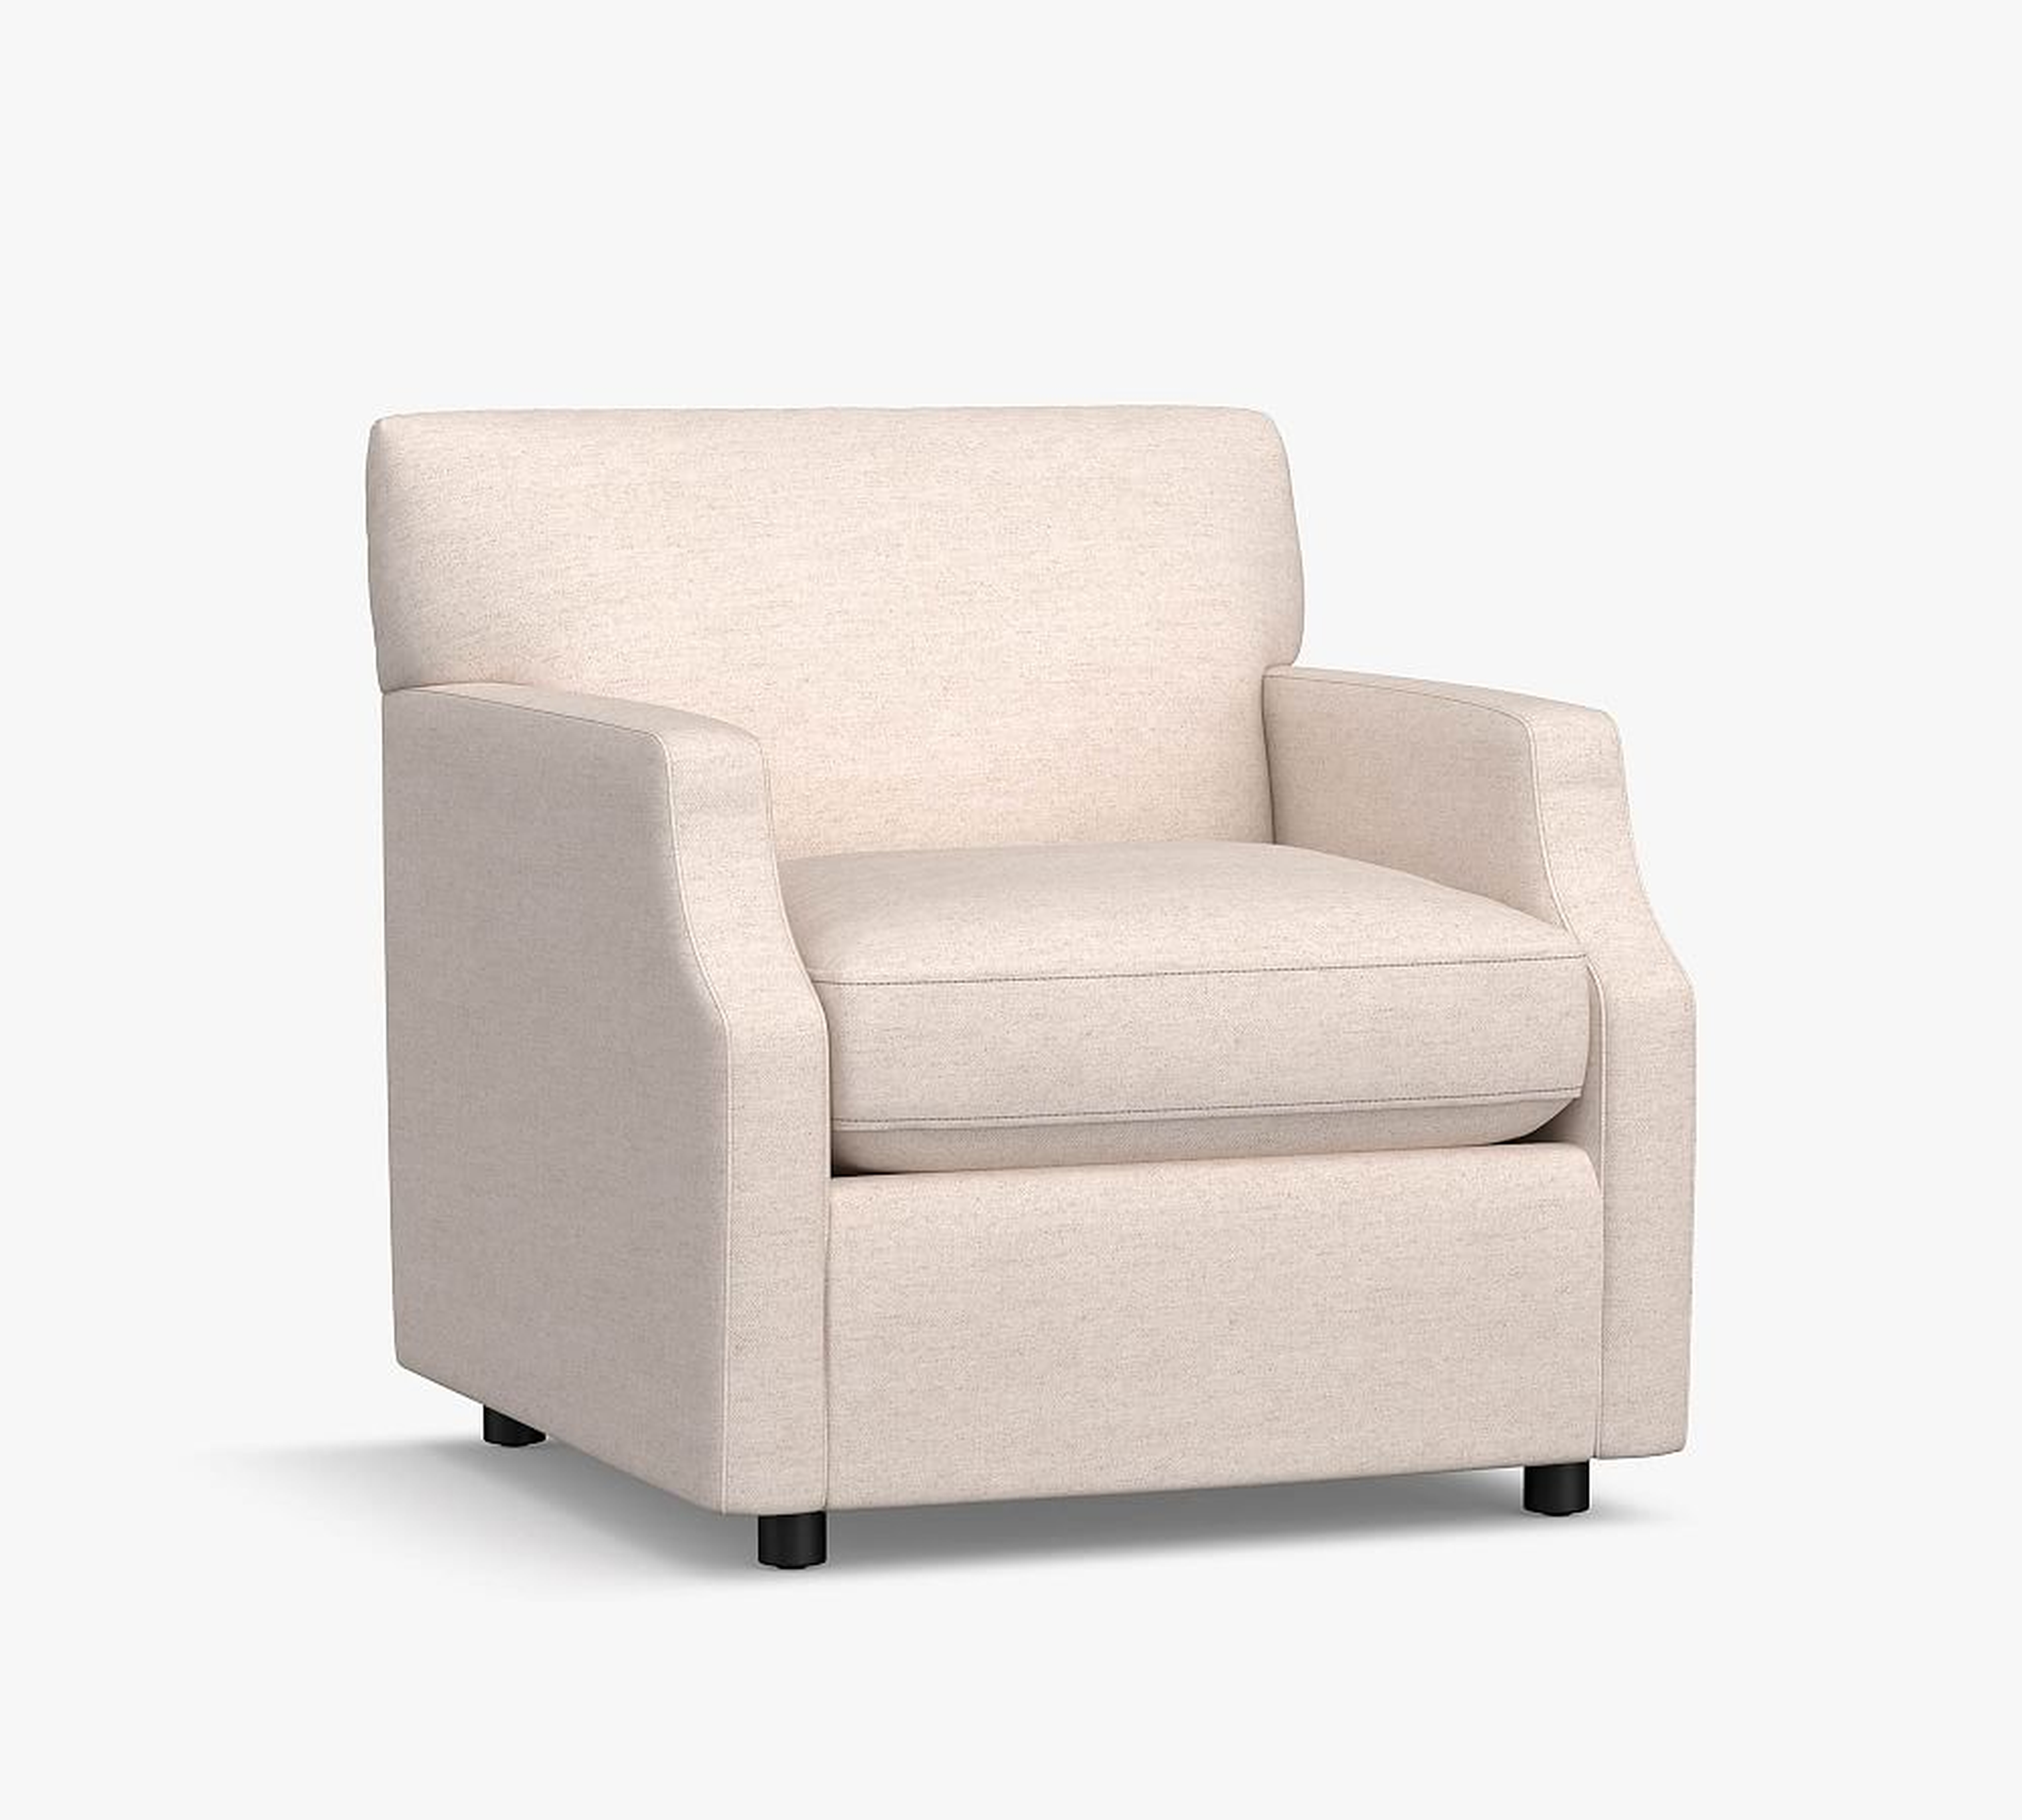 SoMa Hazel Upholstered Armchair, Polyester Wrapped Cushions, Performance Heathered Tweed Ivory - Pottery Barn